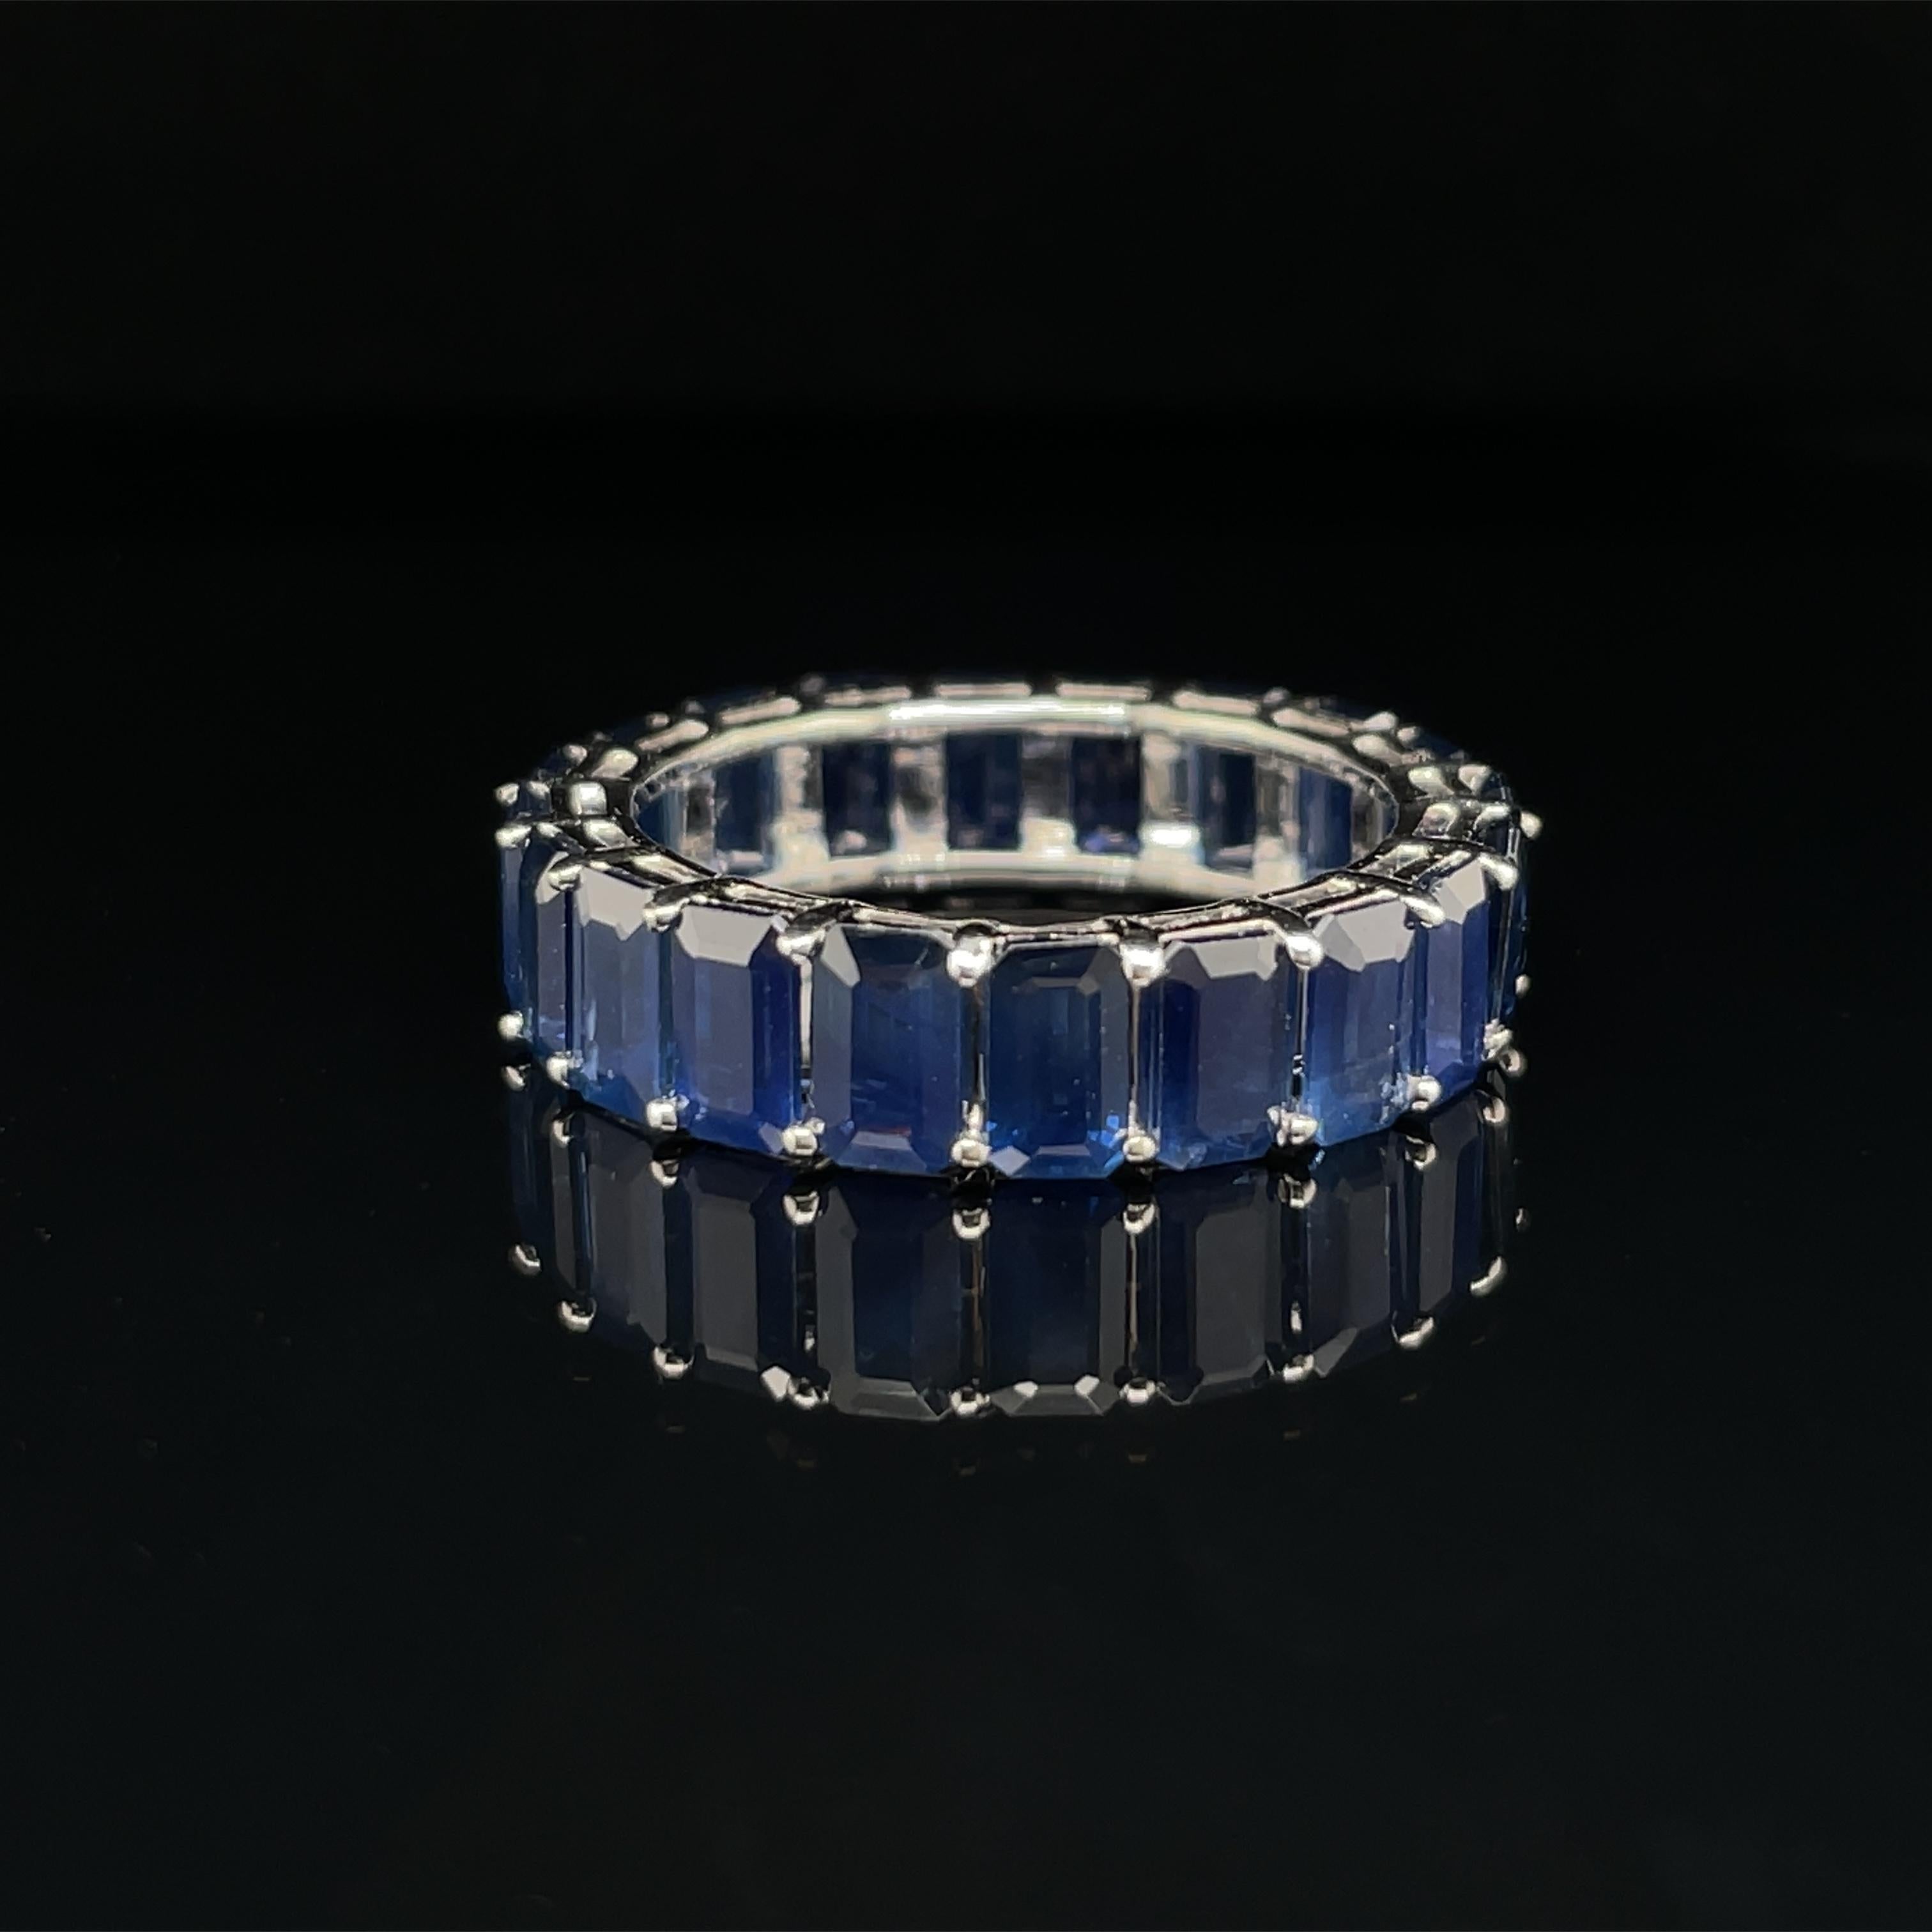 Stone : Blue Sapphire
Type : Natural
Ring Weight- 3.45 gms
Ring Size - US 6.25
Ring Width : 5.1 mm
Ring Height : 3.00 mm
Shape : Octagon
Size : 5x3 mm
Weight : 7.68 Carats
Metal : White Gold
Enhancement : Heated

Please allow 5-10% fluctuation in